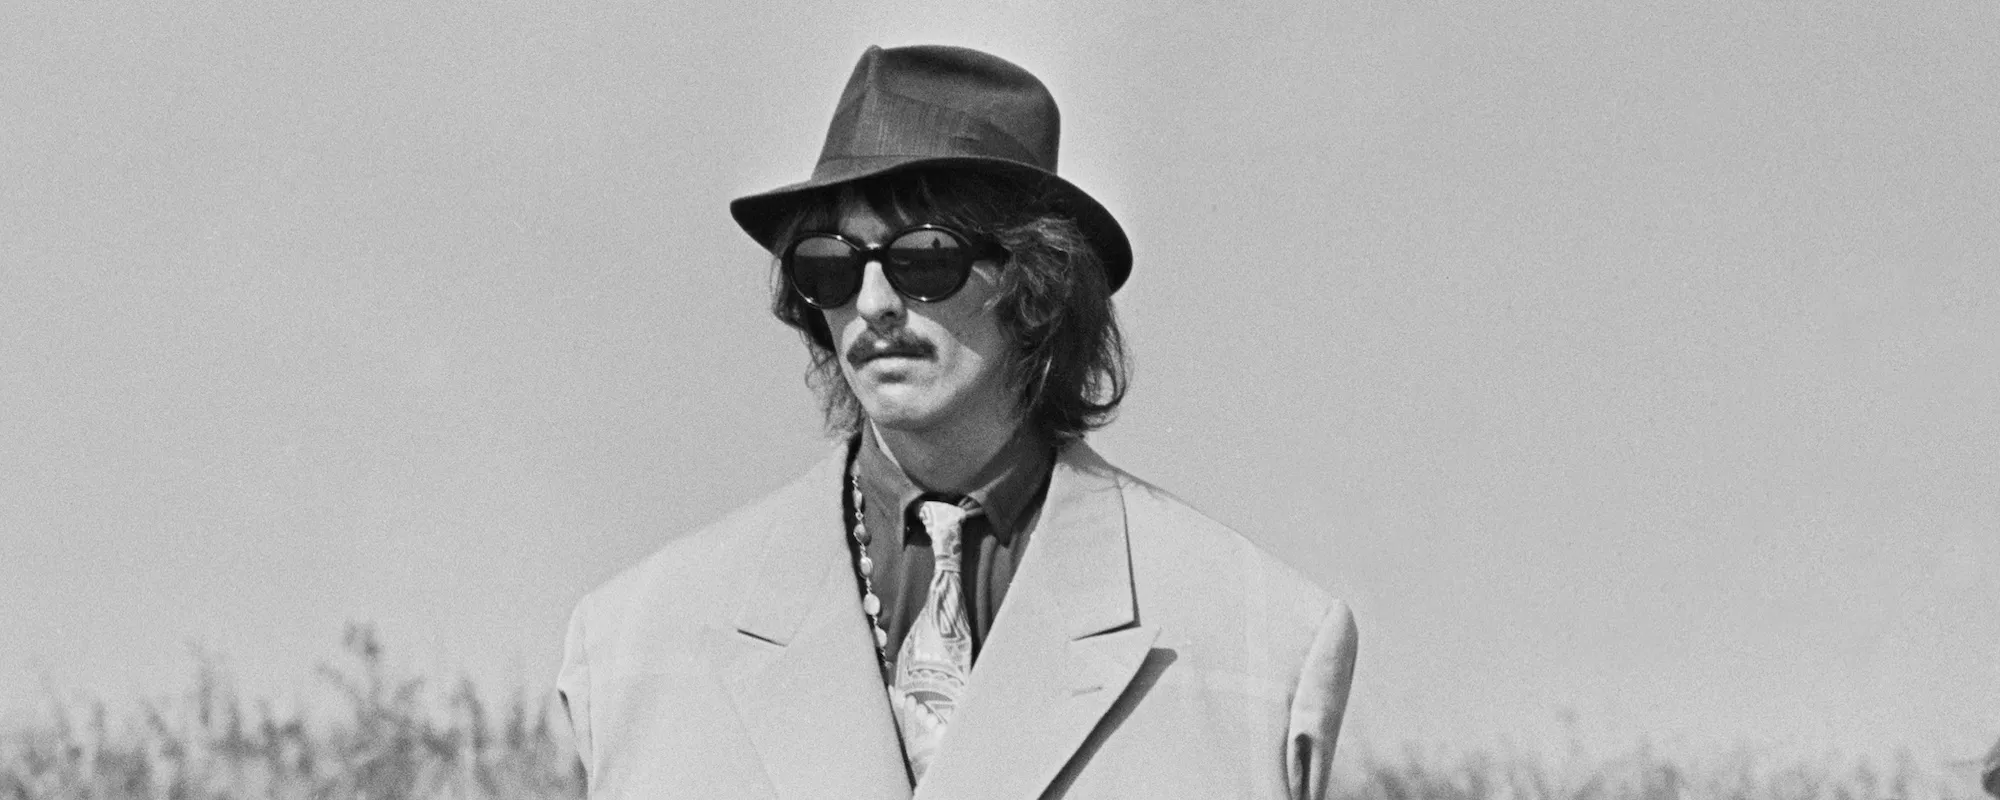 George Harrison Hated This Neil Young Song and His Guitar Playing: “It’s Good for a Laugh”